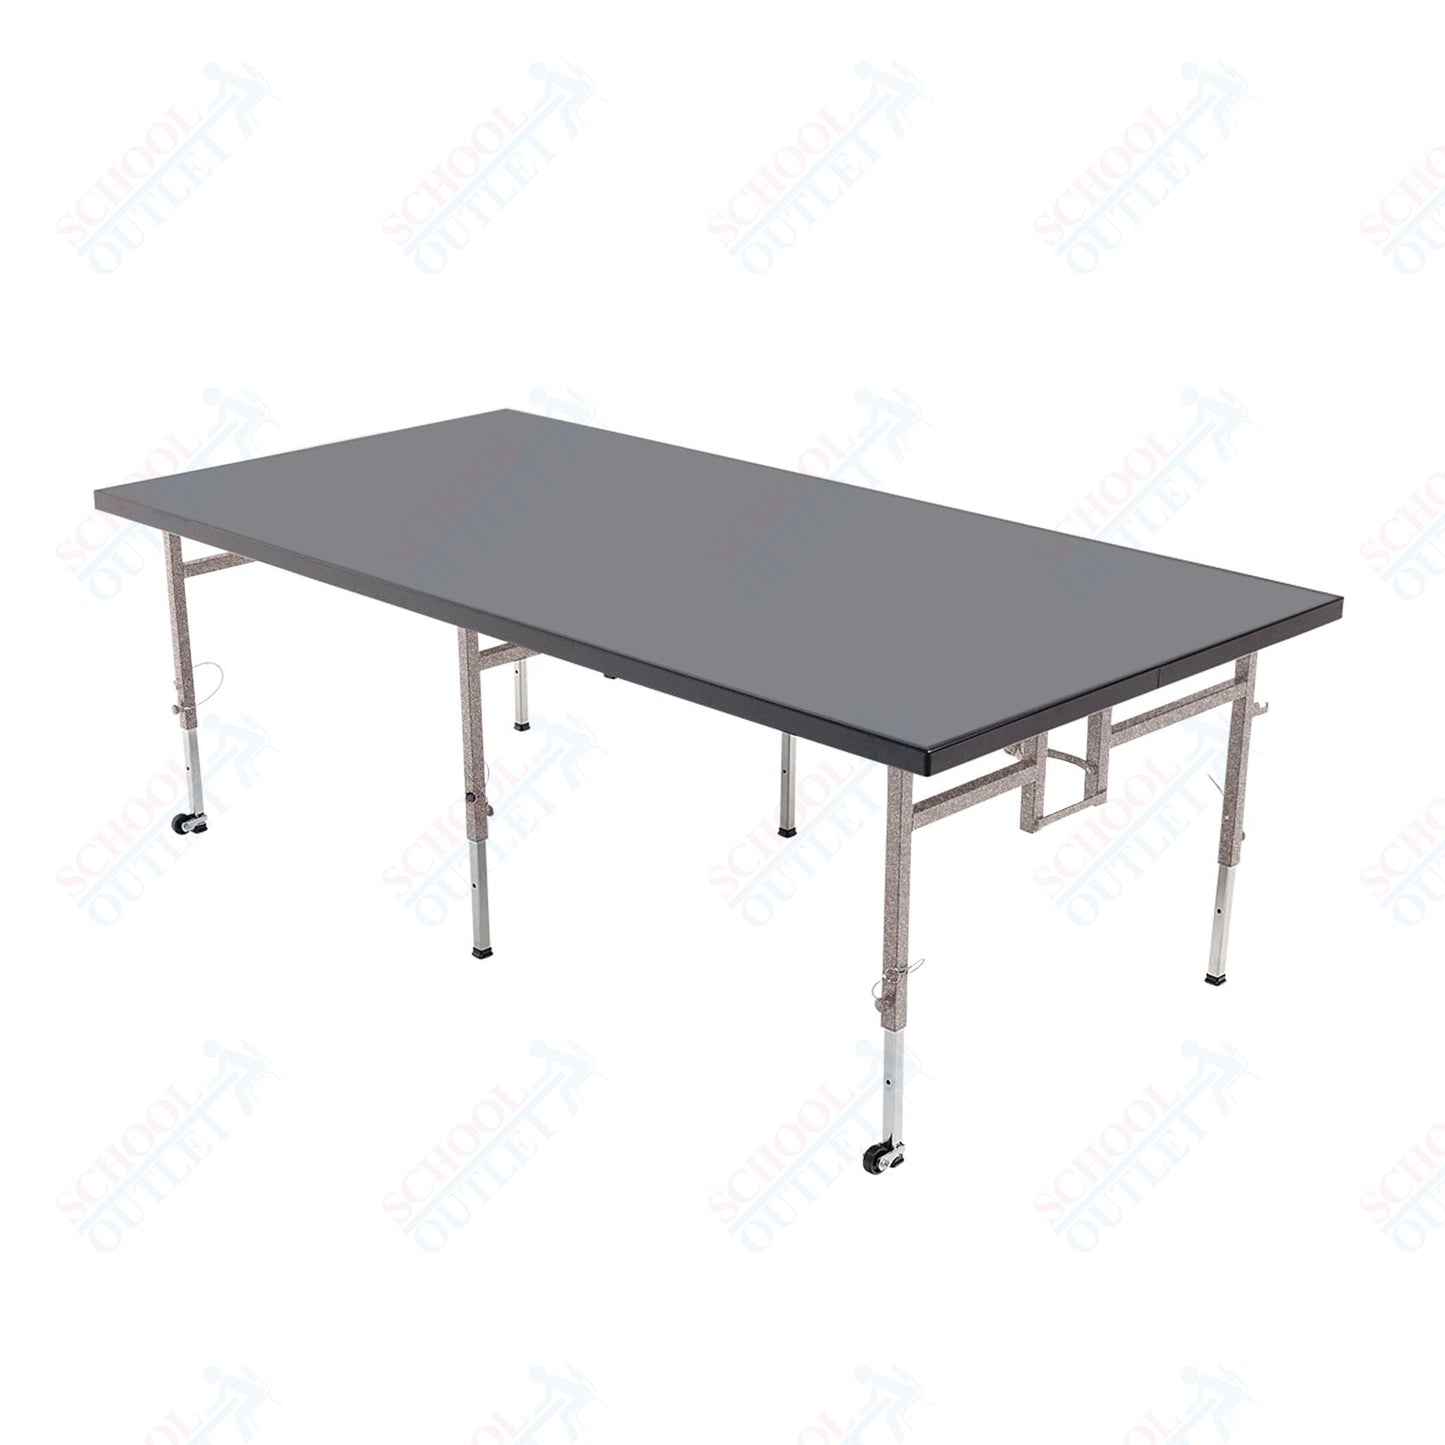 AmTab Adjustable Height Stage - Polypropylene Top - 48"W x 48"L x Adjustable 16" to 24"H  (AmTab AMT-STA4416P)